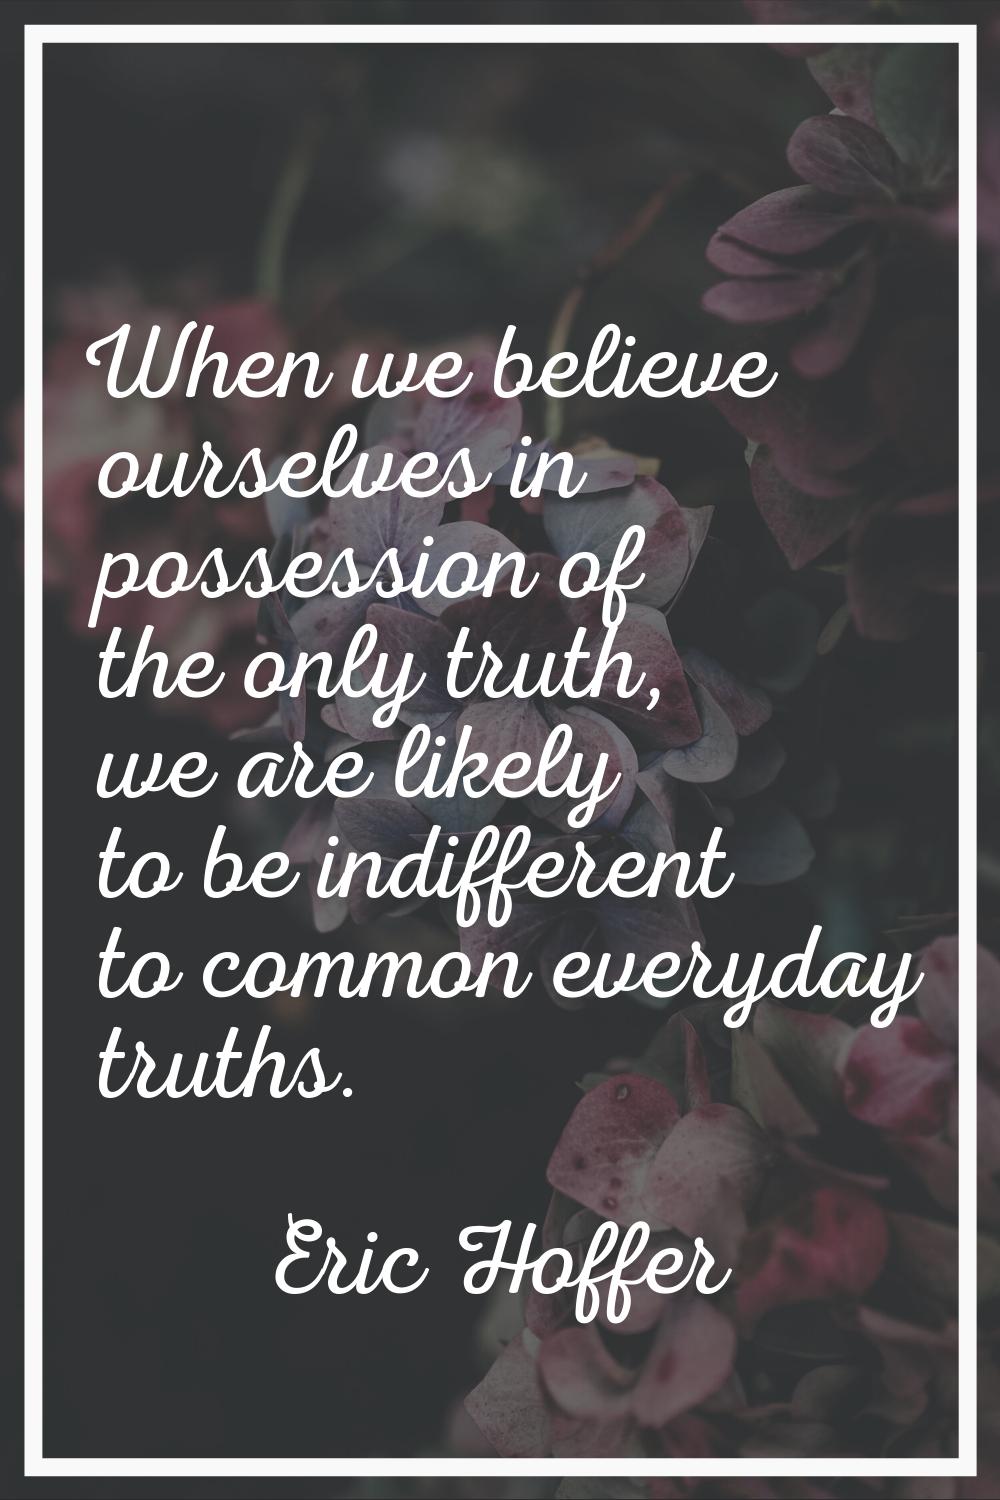 When we believe ourselves in possession of the only truth, we are likely to be indifferent to commo